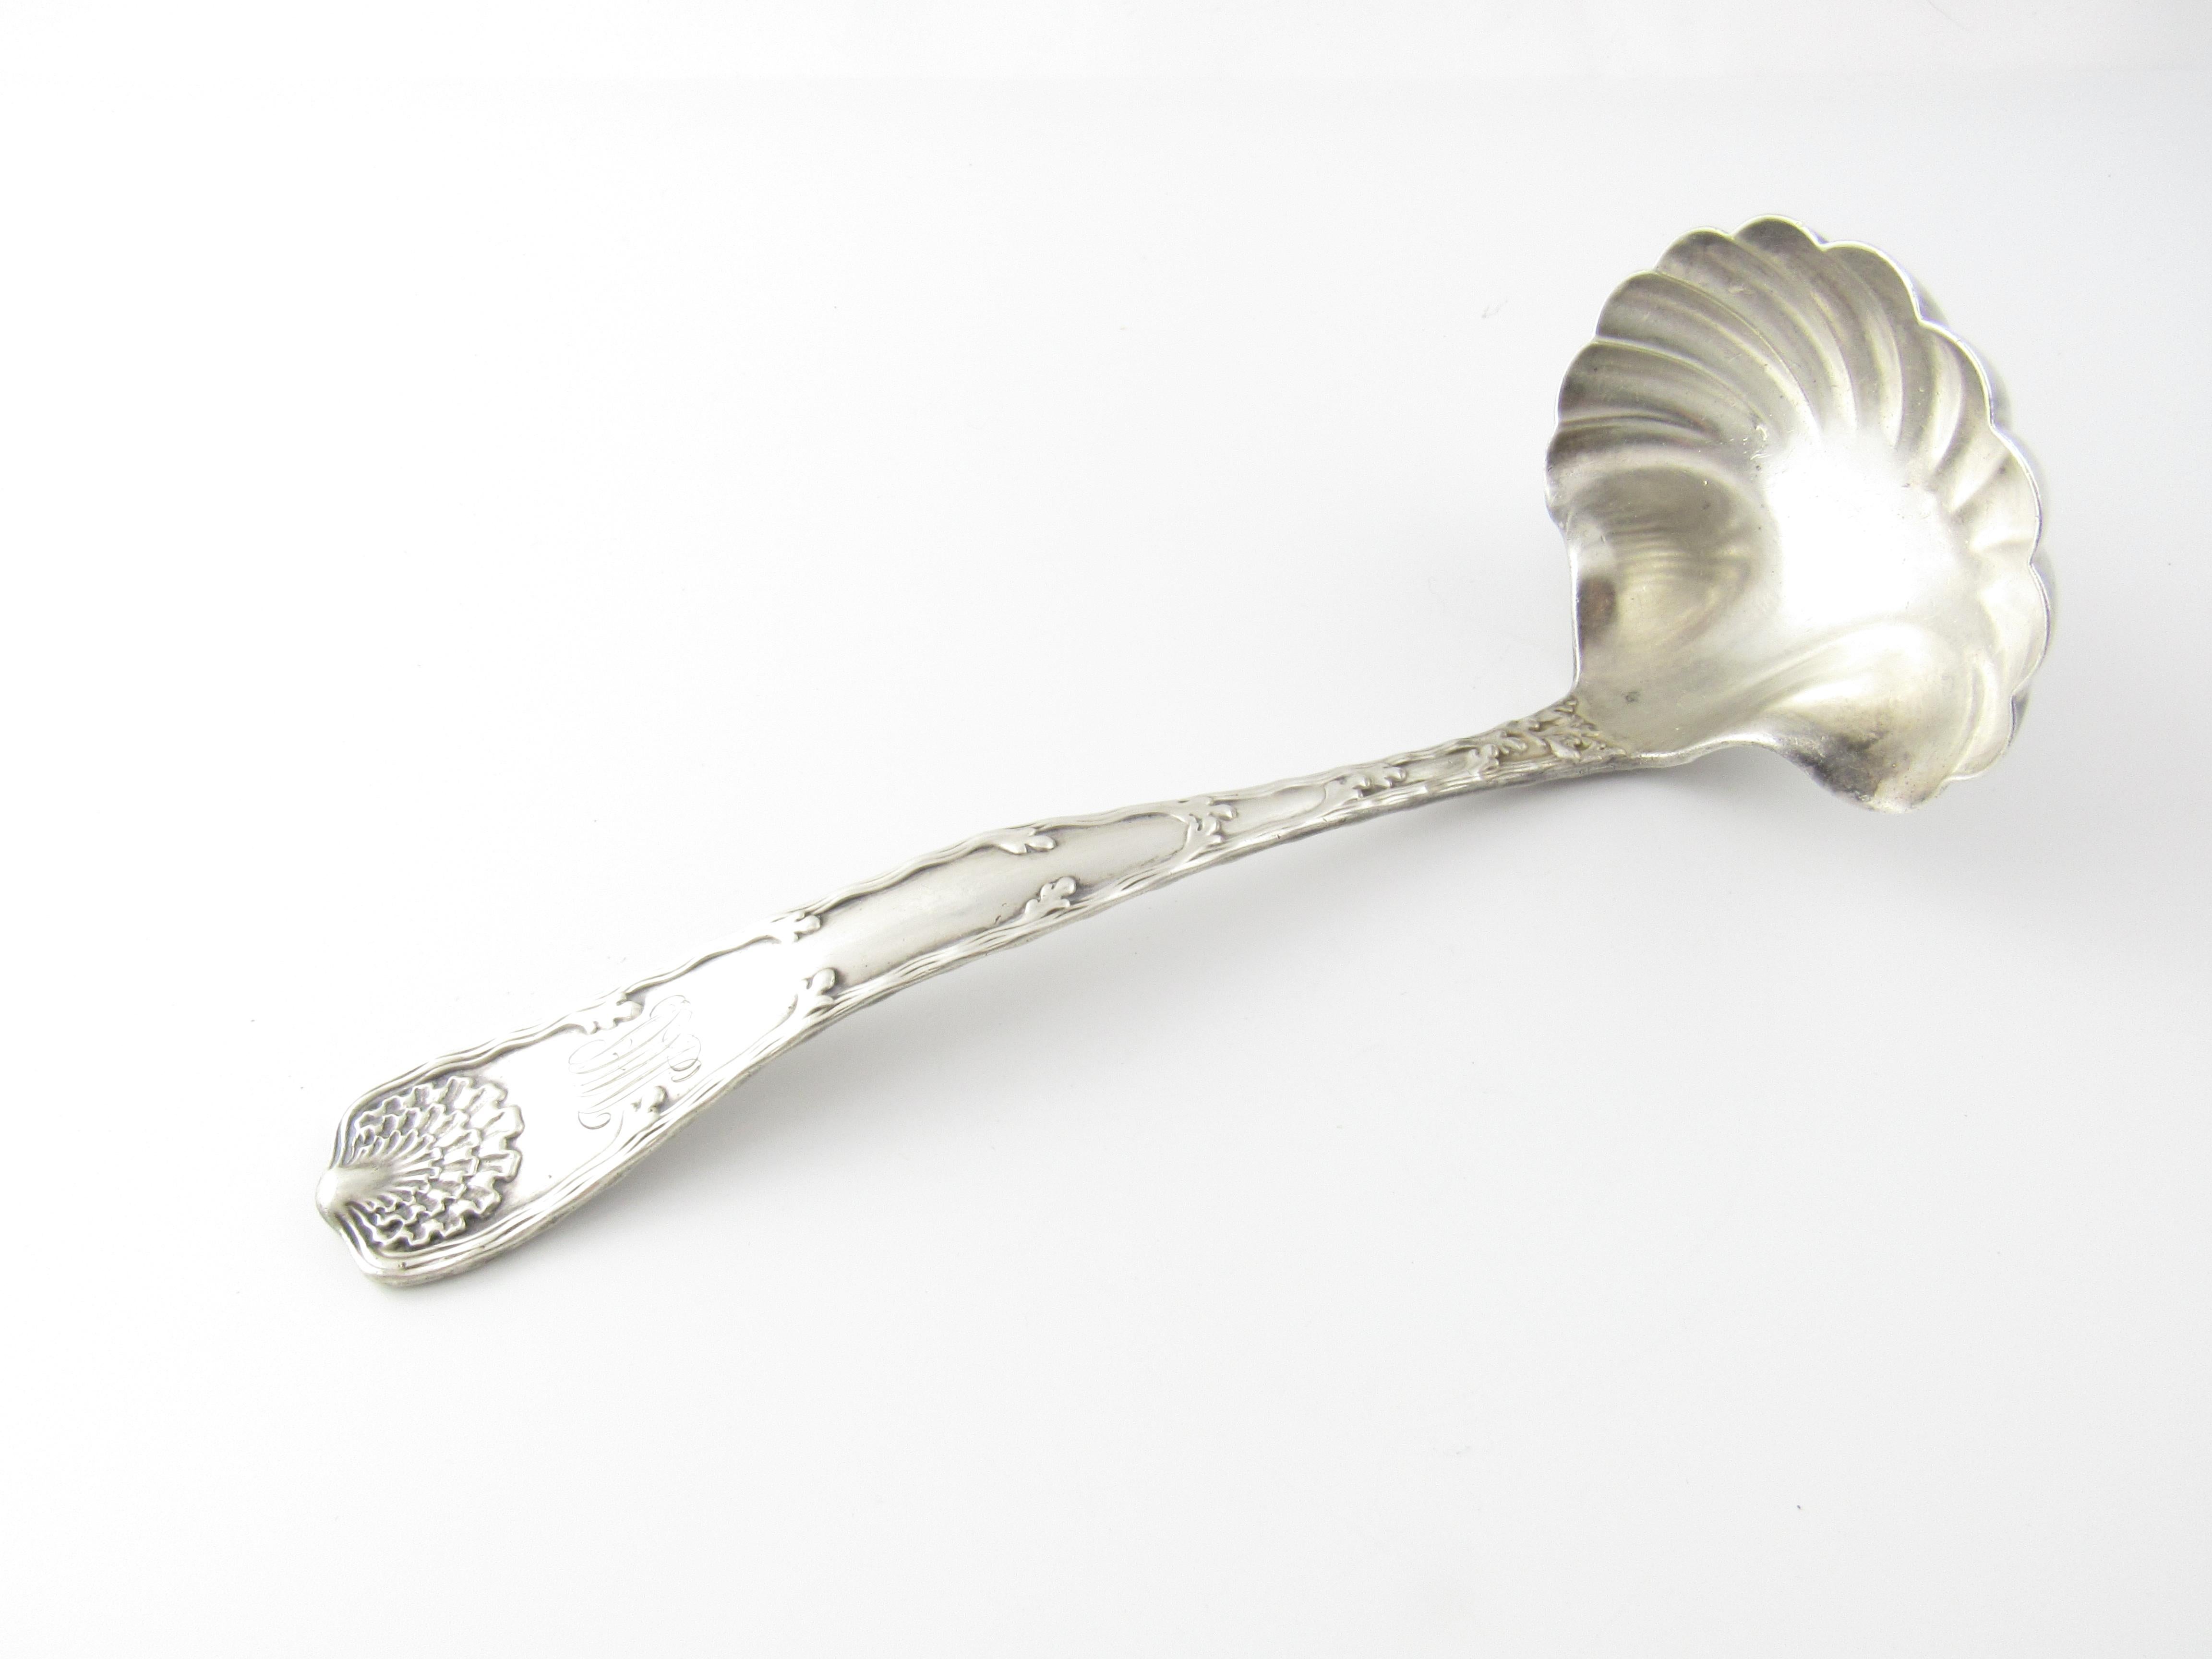 Tiffany & Co. Wave Edge Sterling Silver Ladle with Monogram 1